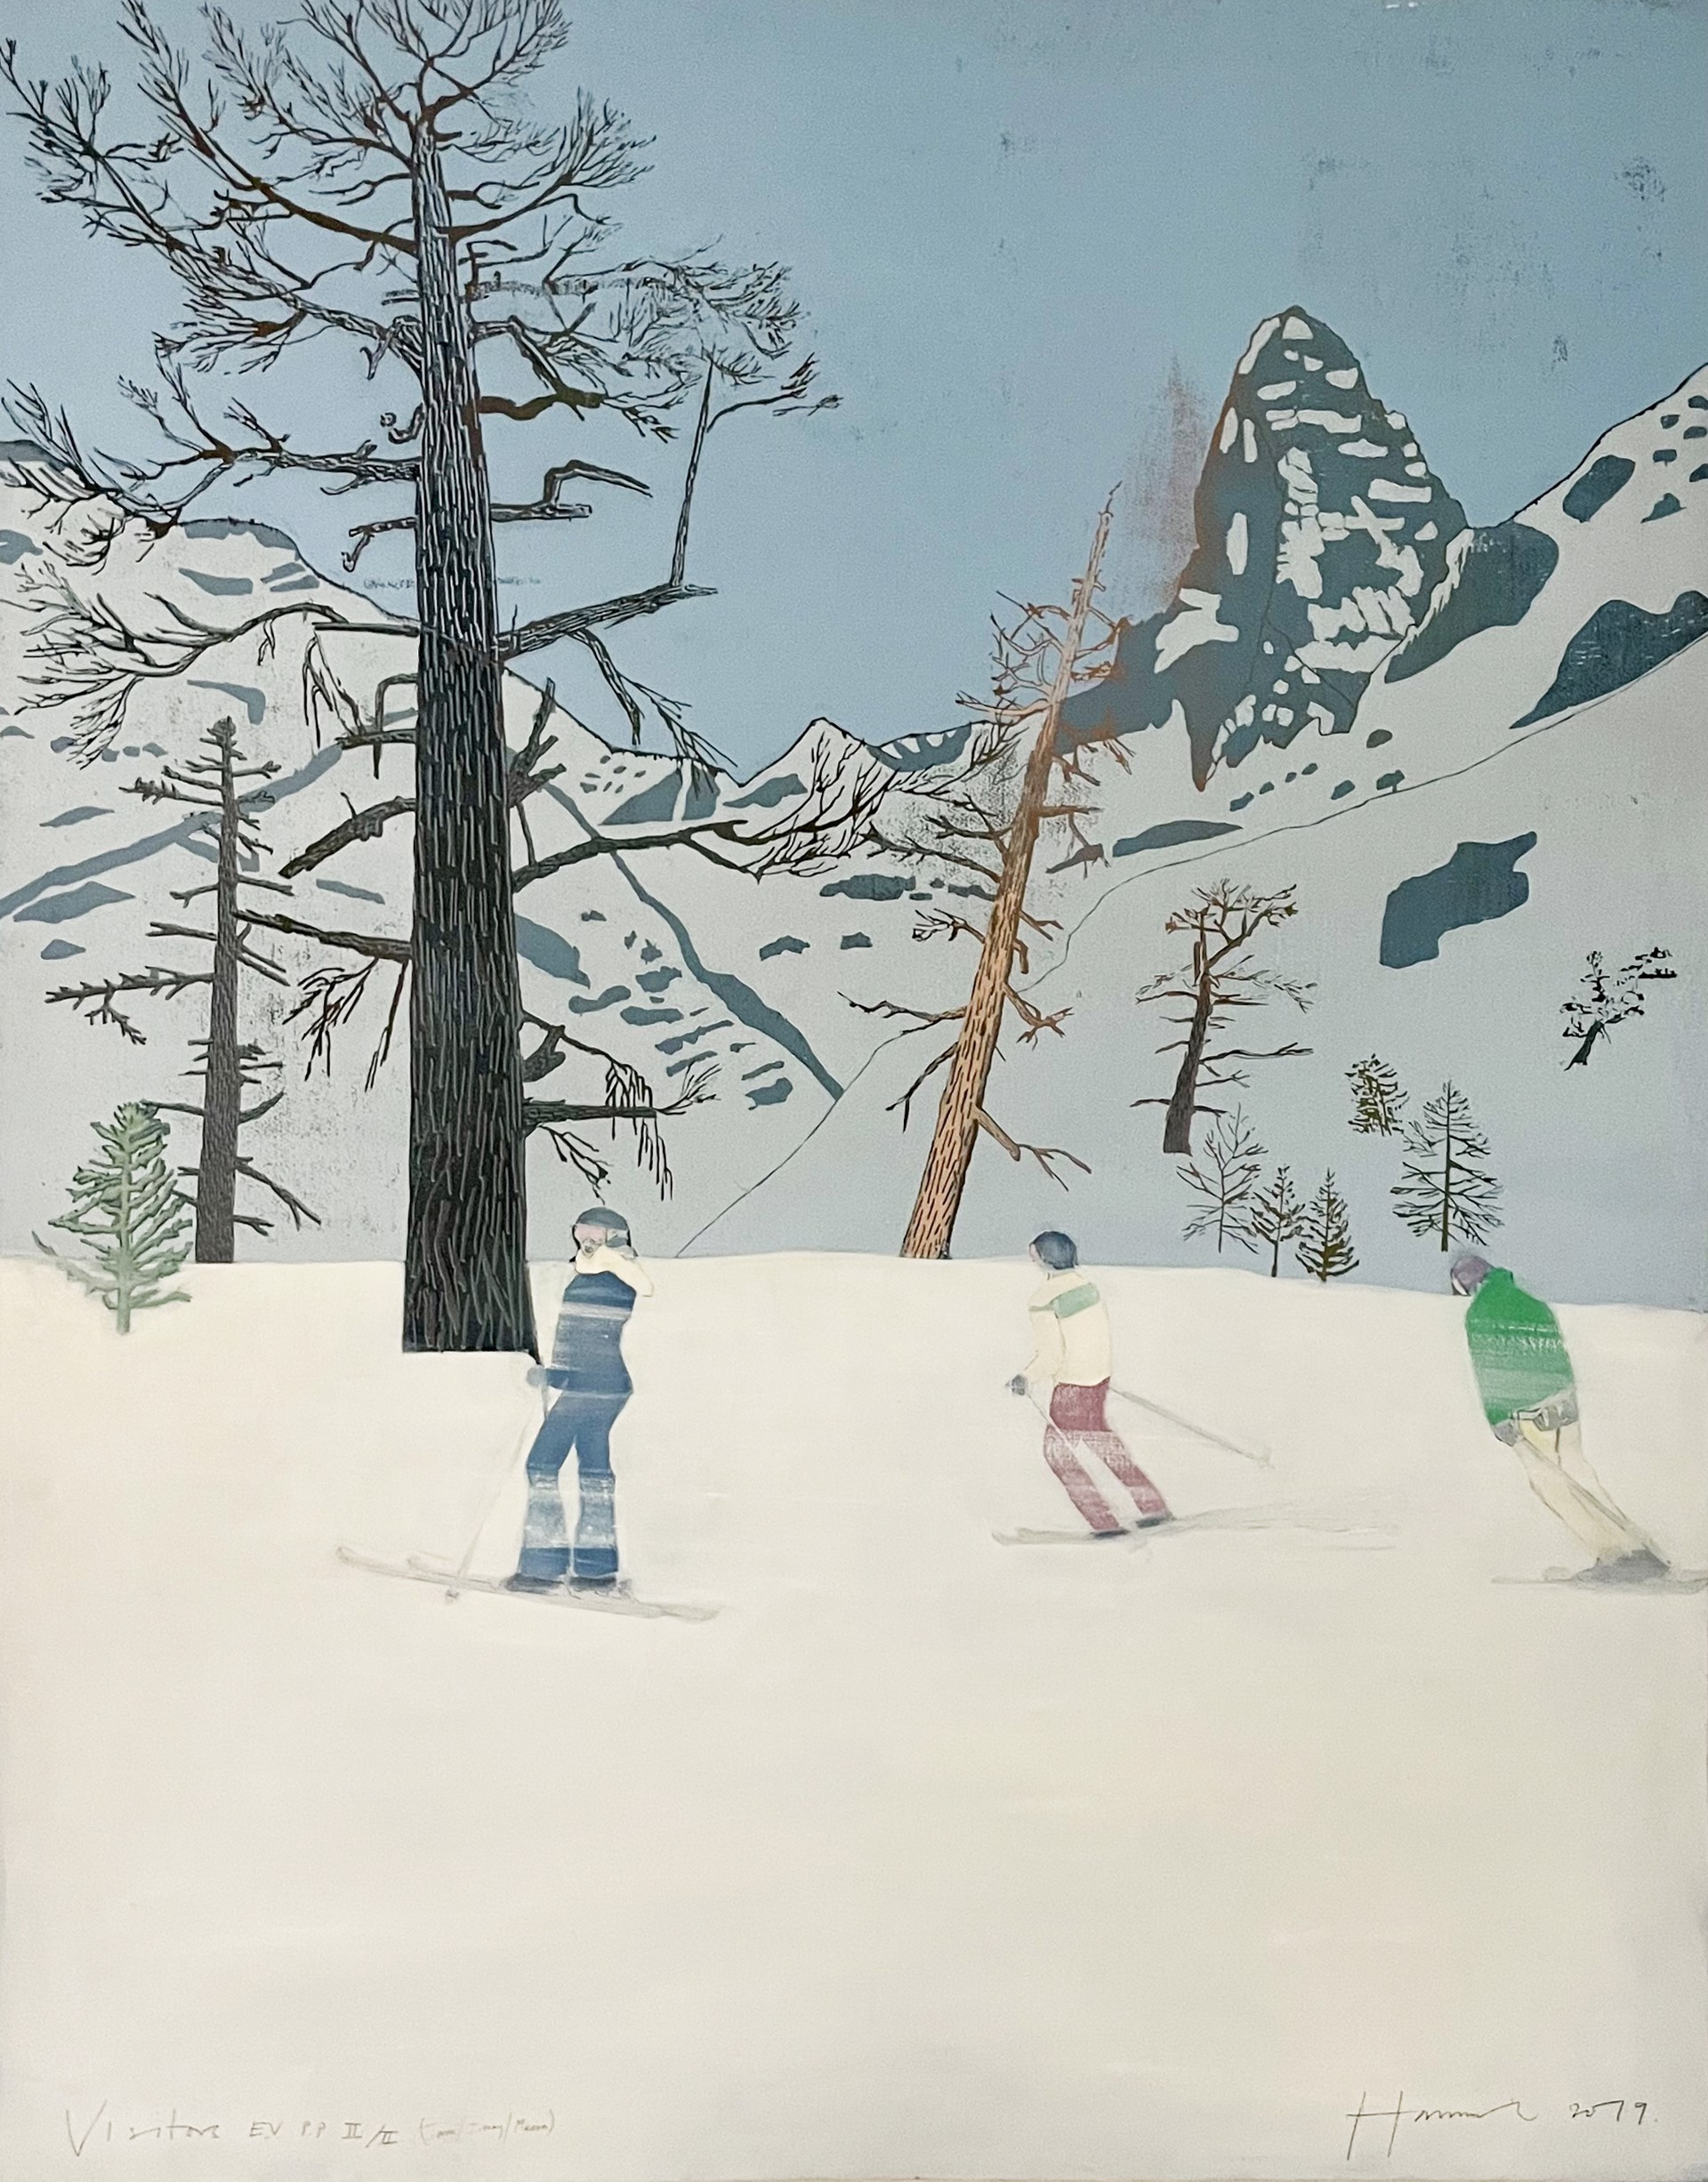 Visitors PP by Tom Hammick